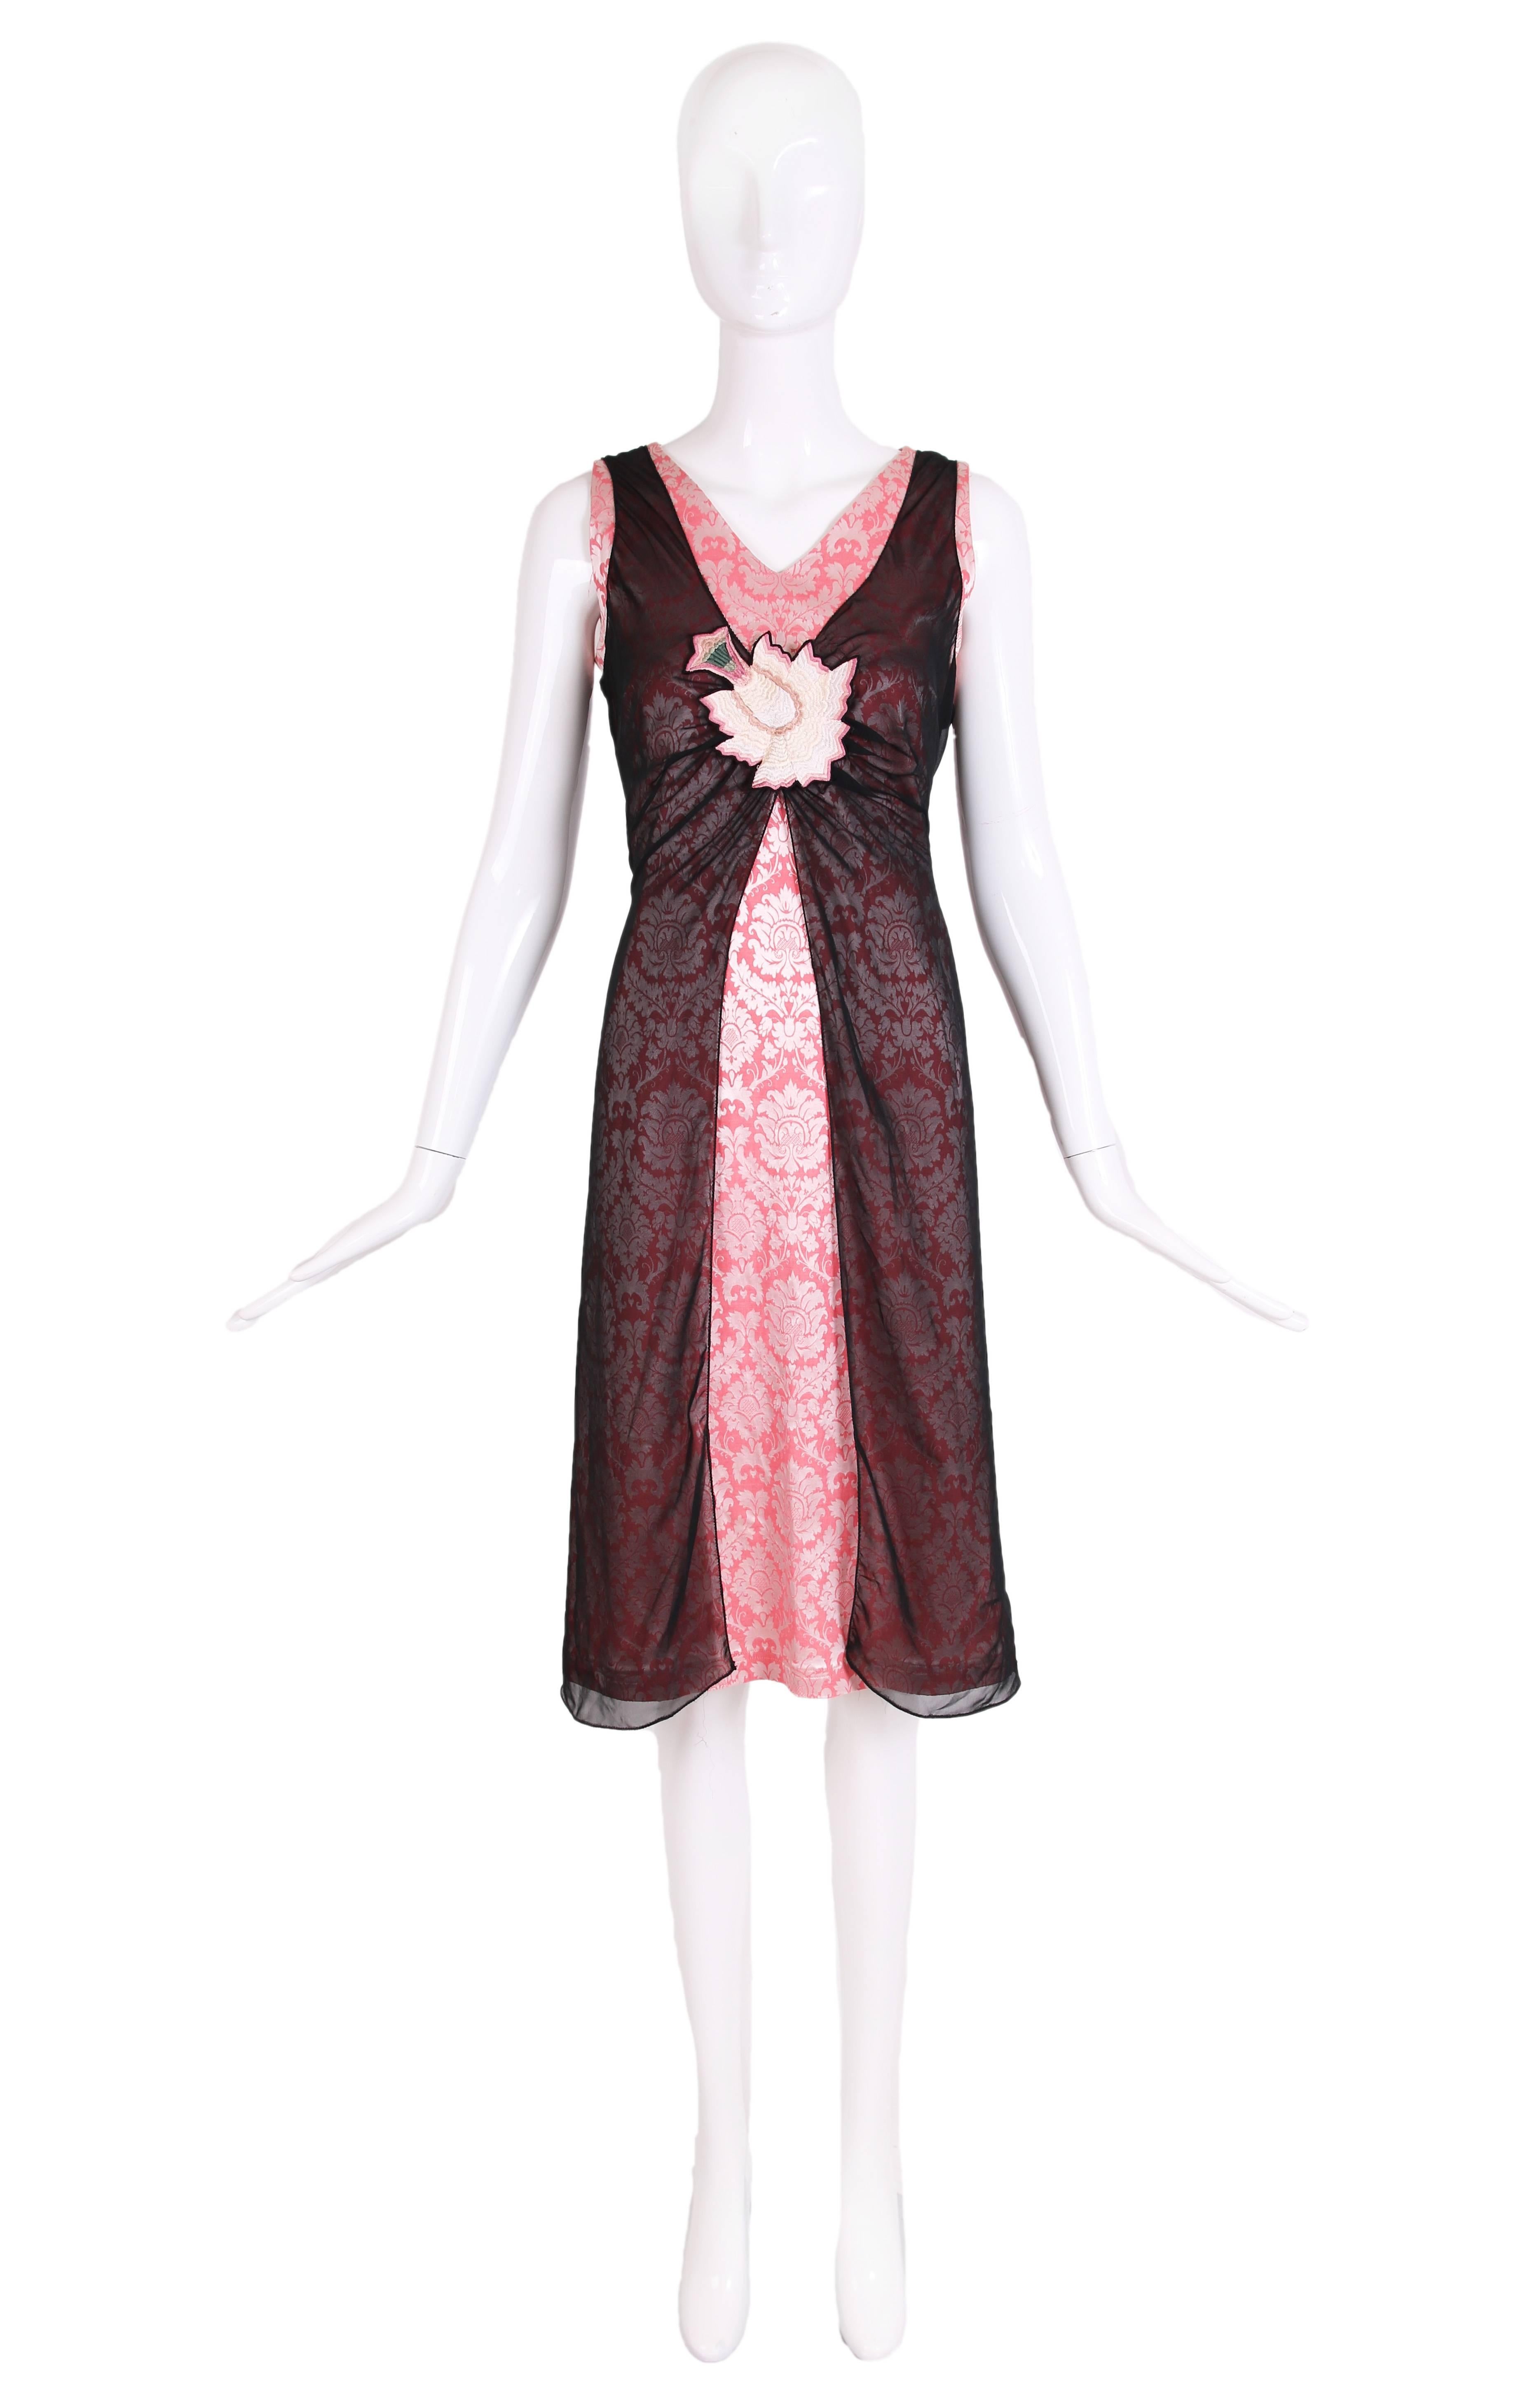 Alexander McQueen, circa 1996 sleeveless dress comprised of two layers: a stretch pink brocade and a transparent black stretch fabric on top, embellished with a single embroidered flower at the front. Zipper closure at back. In excellent condition.